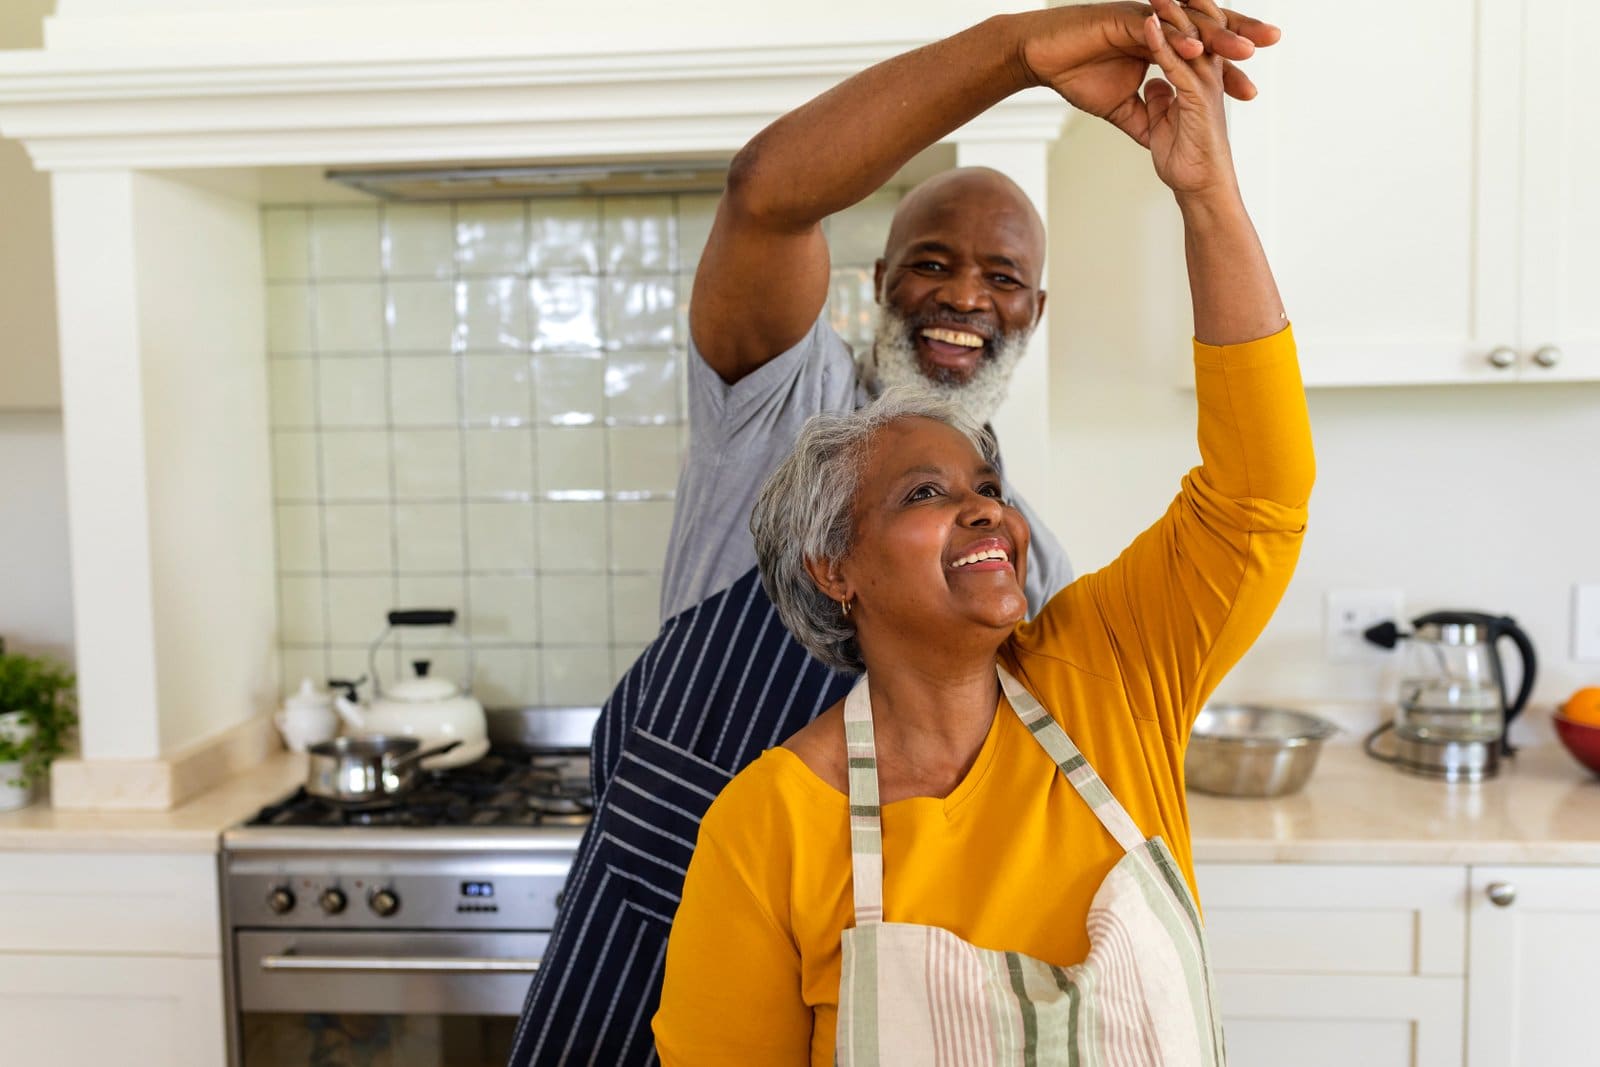 Brain health and prevent alzheimer's: Cute boomer couple dancing in their kitchen